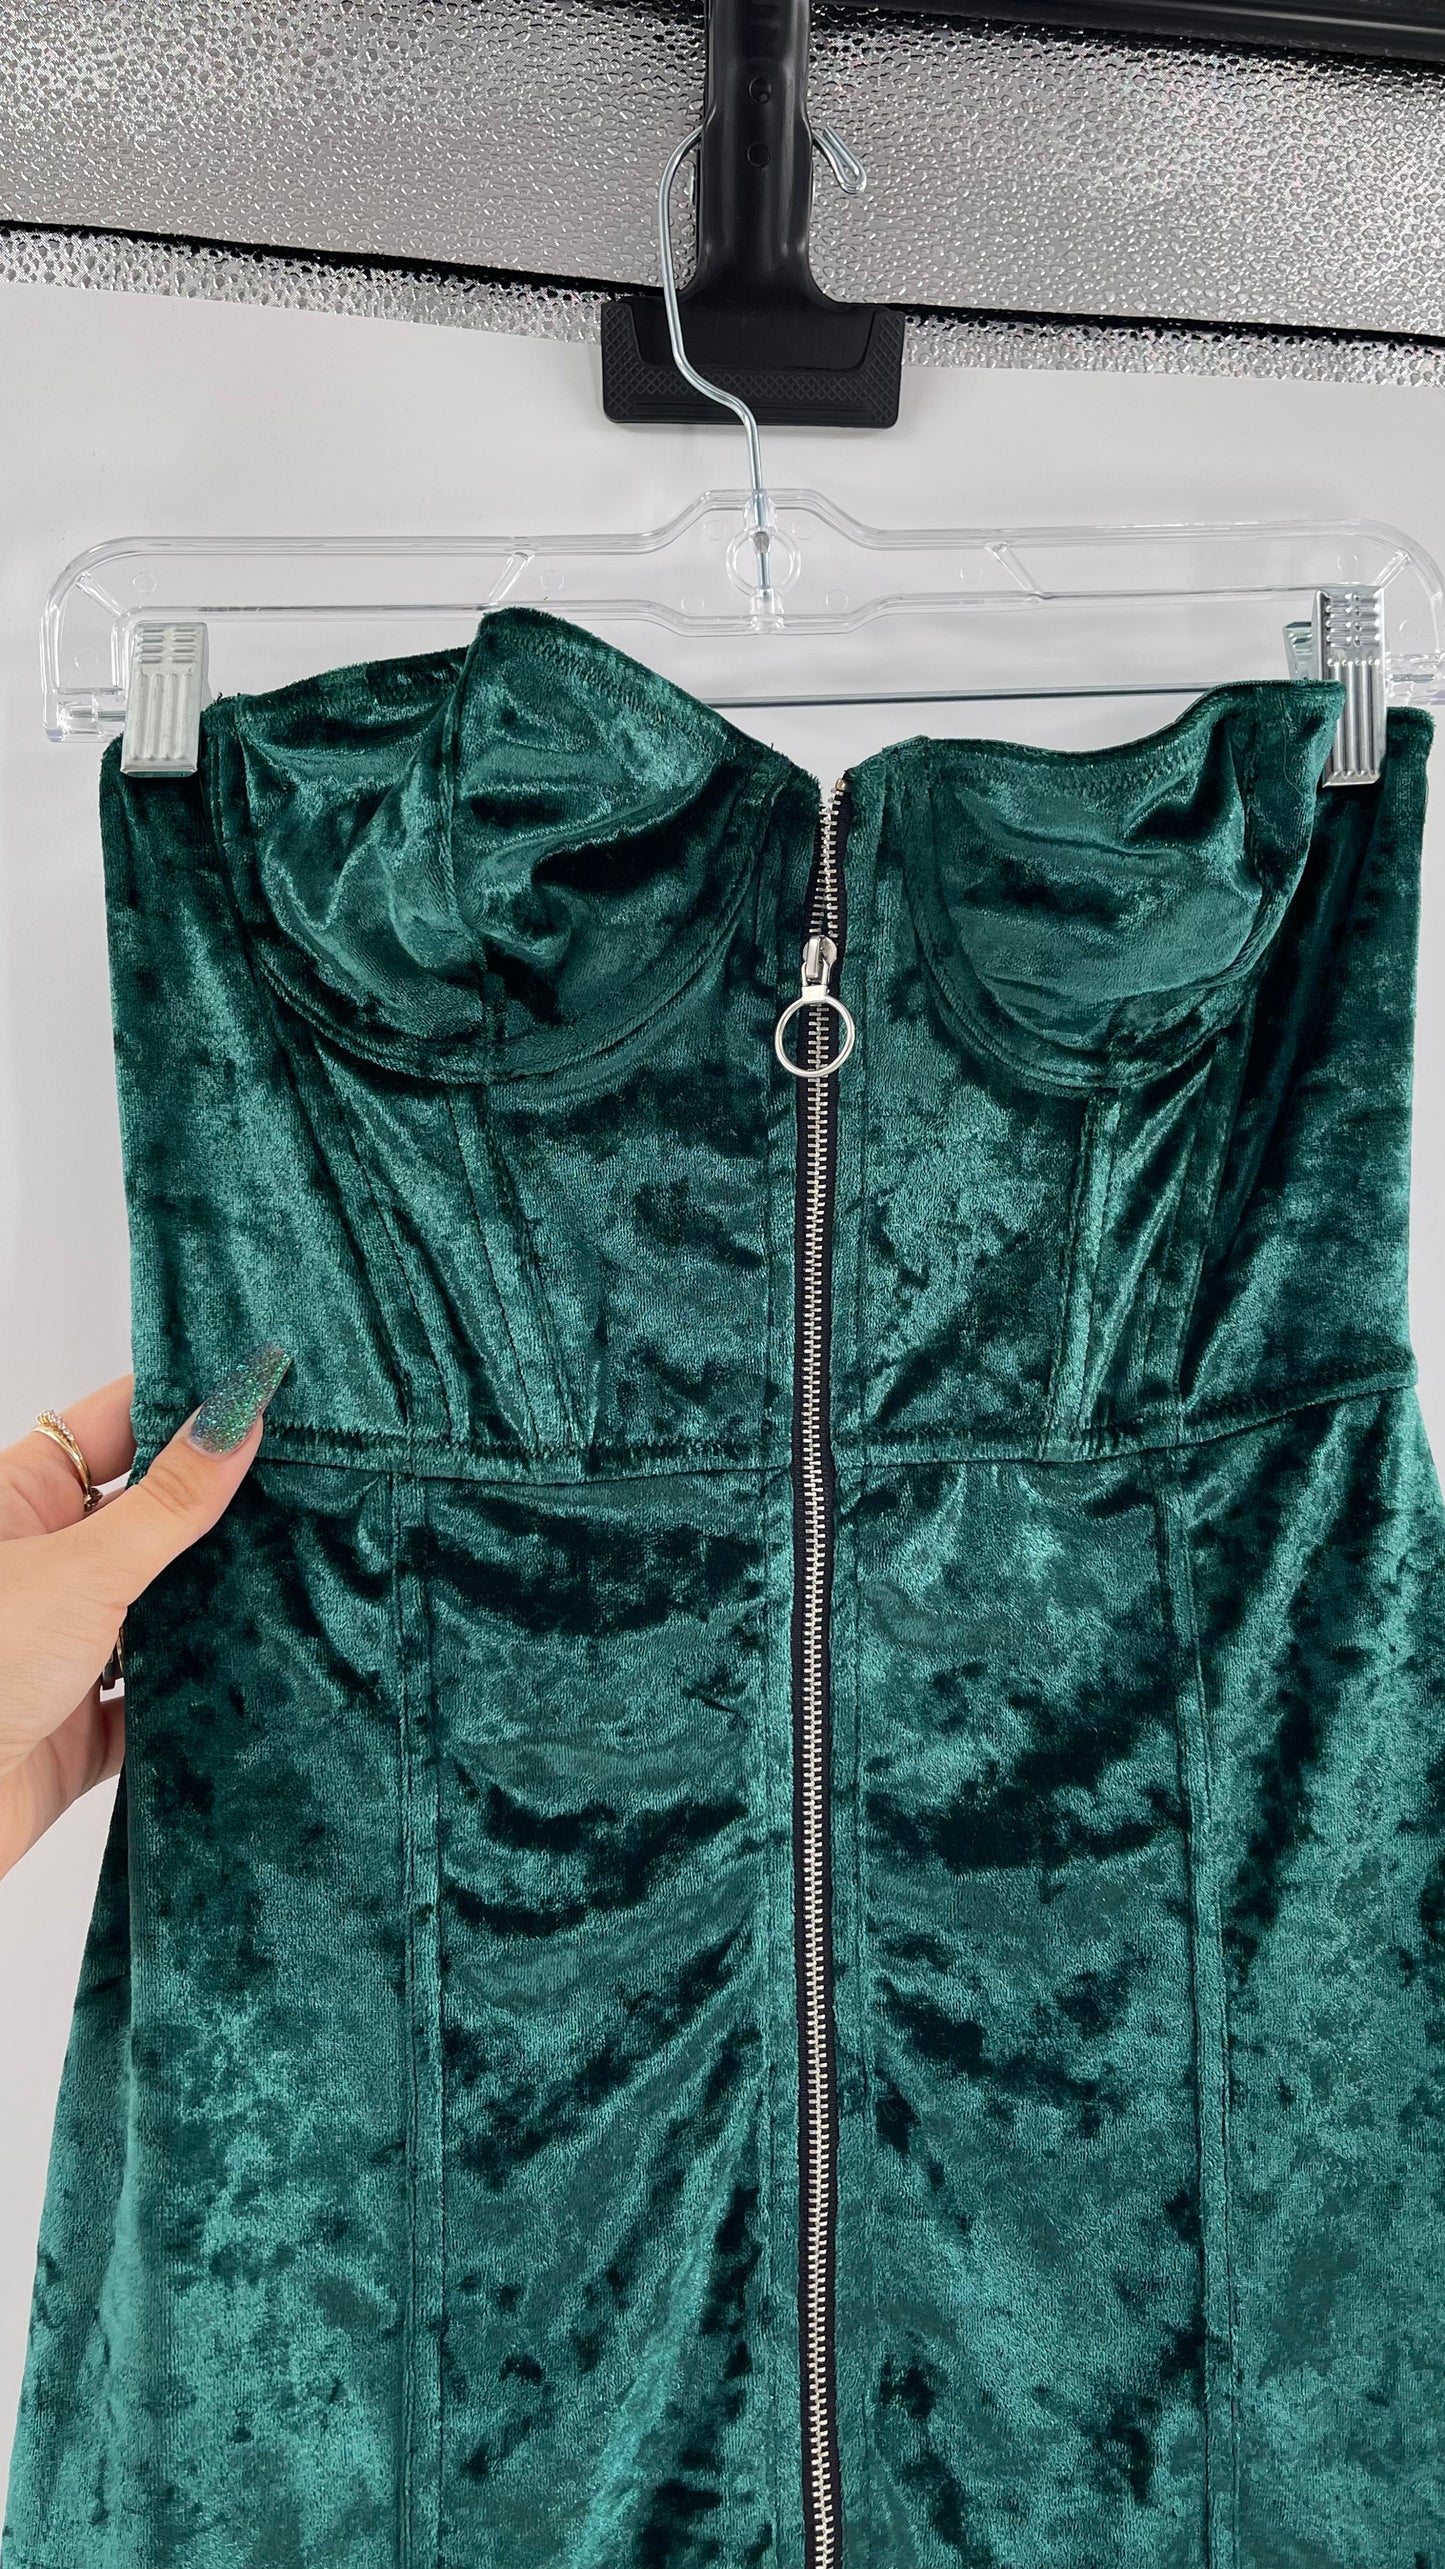 Emerald Green Urban Outfitters Zip Front Corset Dress (Small)